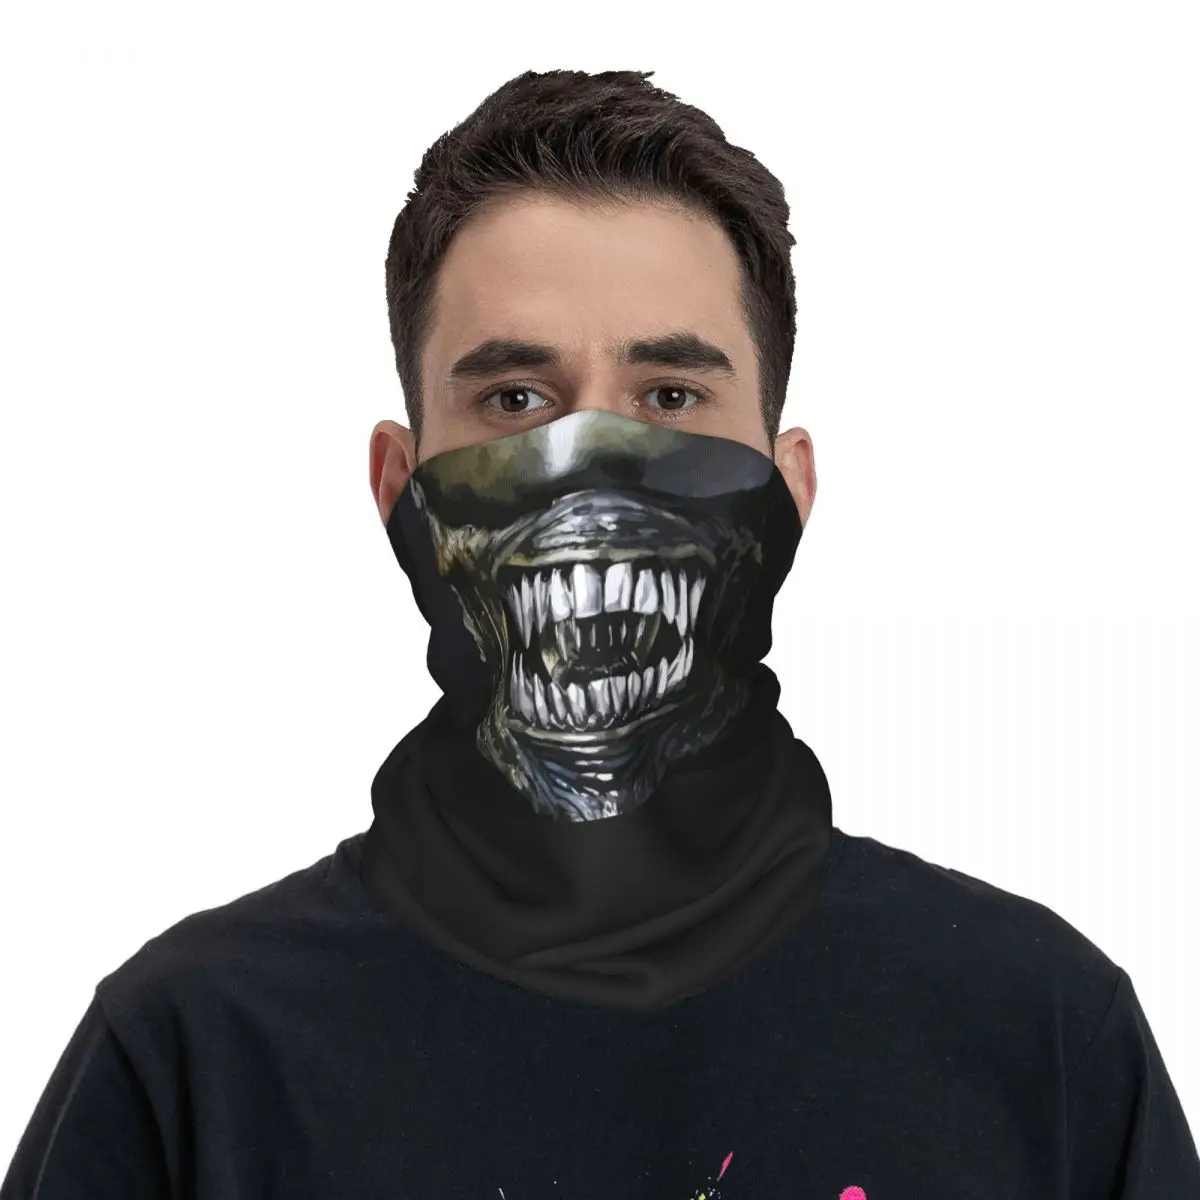 

Alien Mouth Bandana Neck Gaiter Printed Horror Wrap Scarf Multi-use Face Mask Outdoor Sprots Unisex Adult All Season